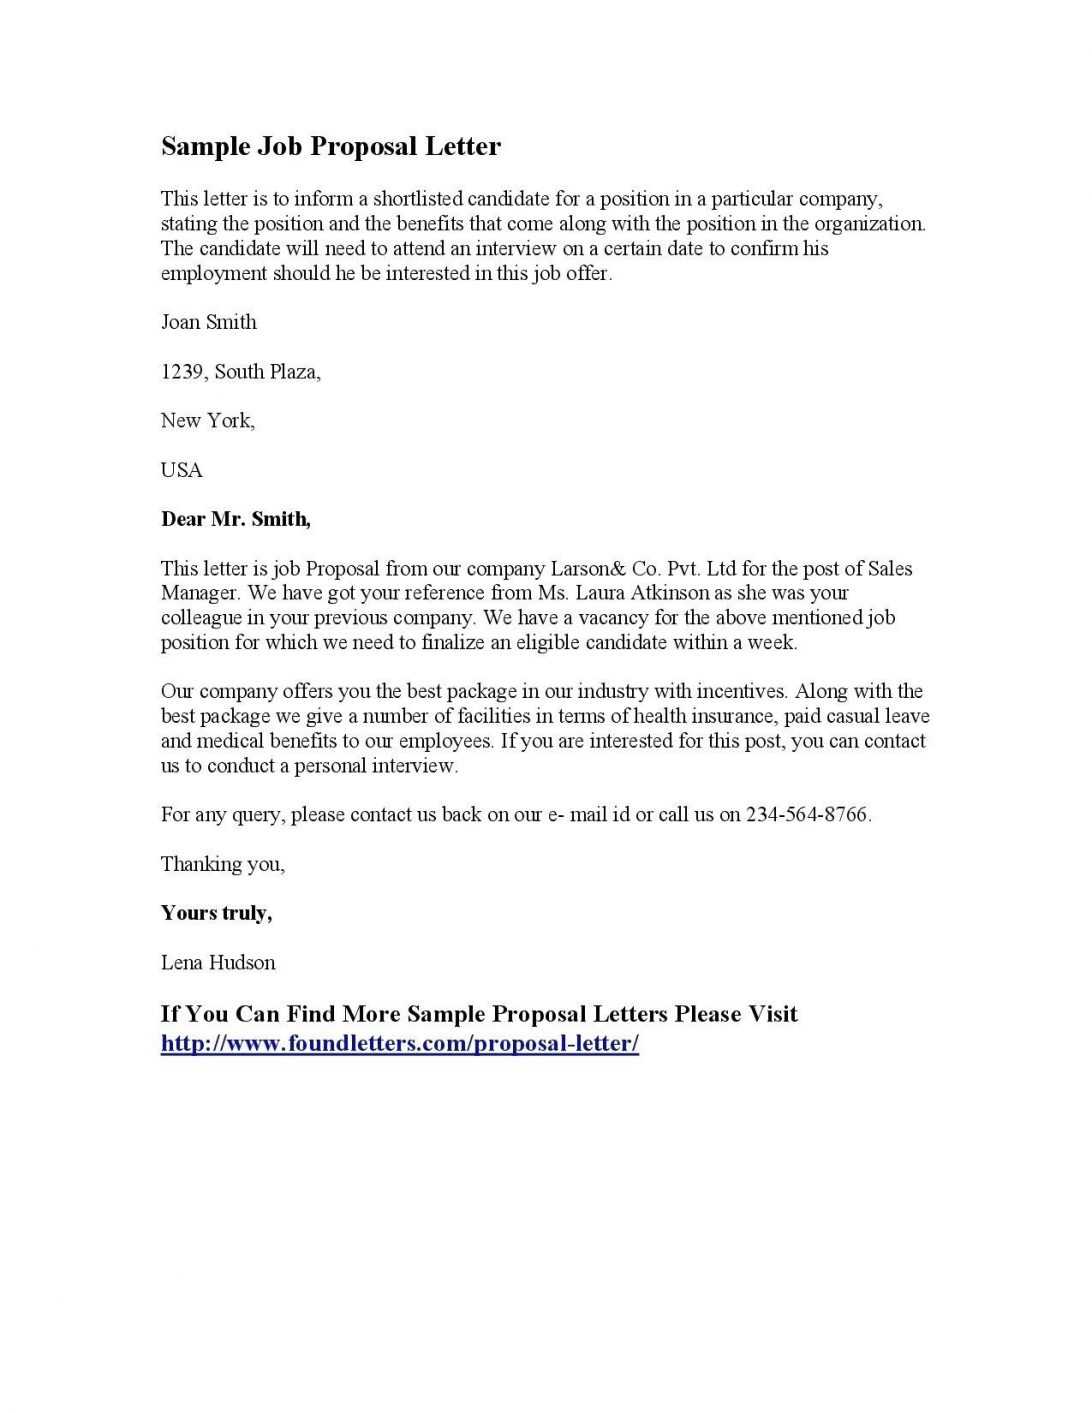 Writing Sample Template 015 Proposal Letter For Employment Regarding Employment Proposal Template